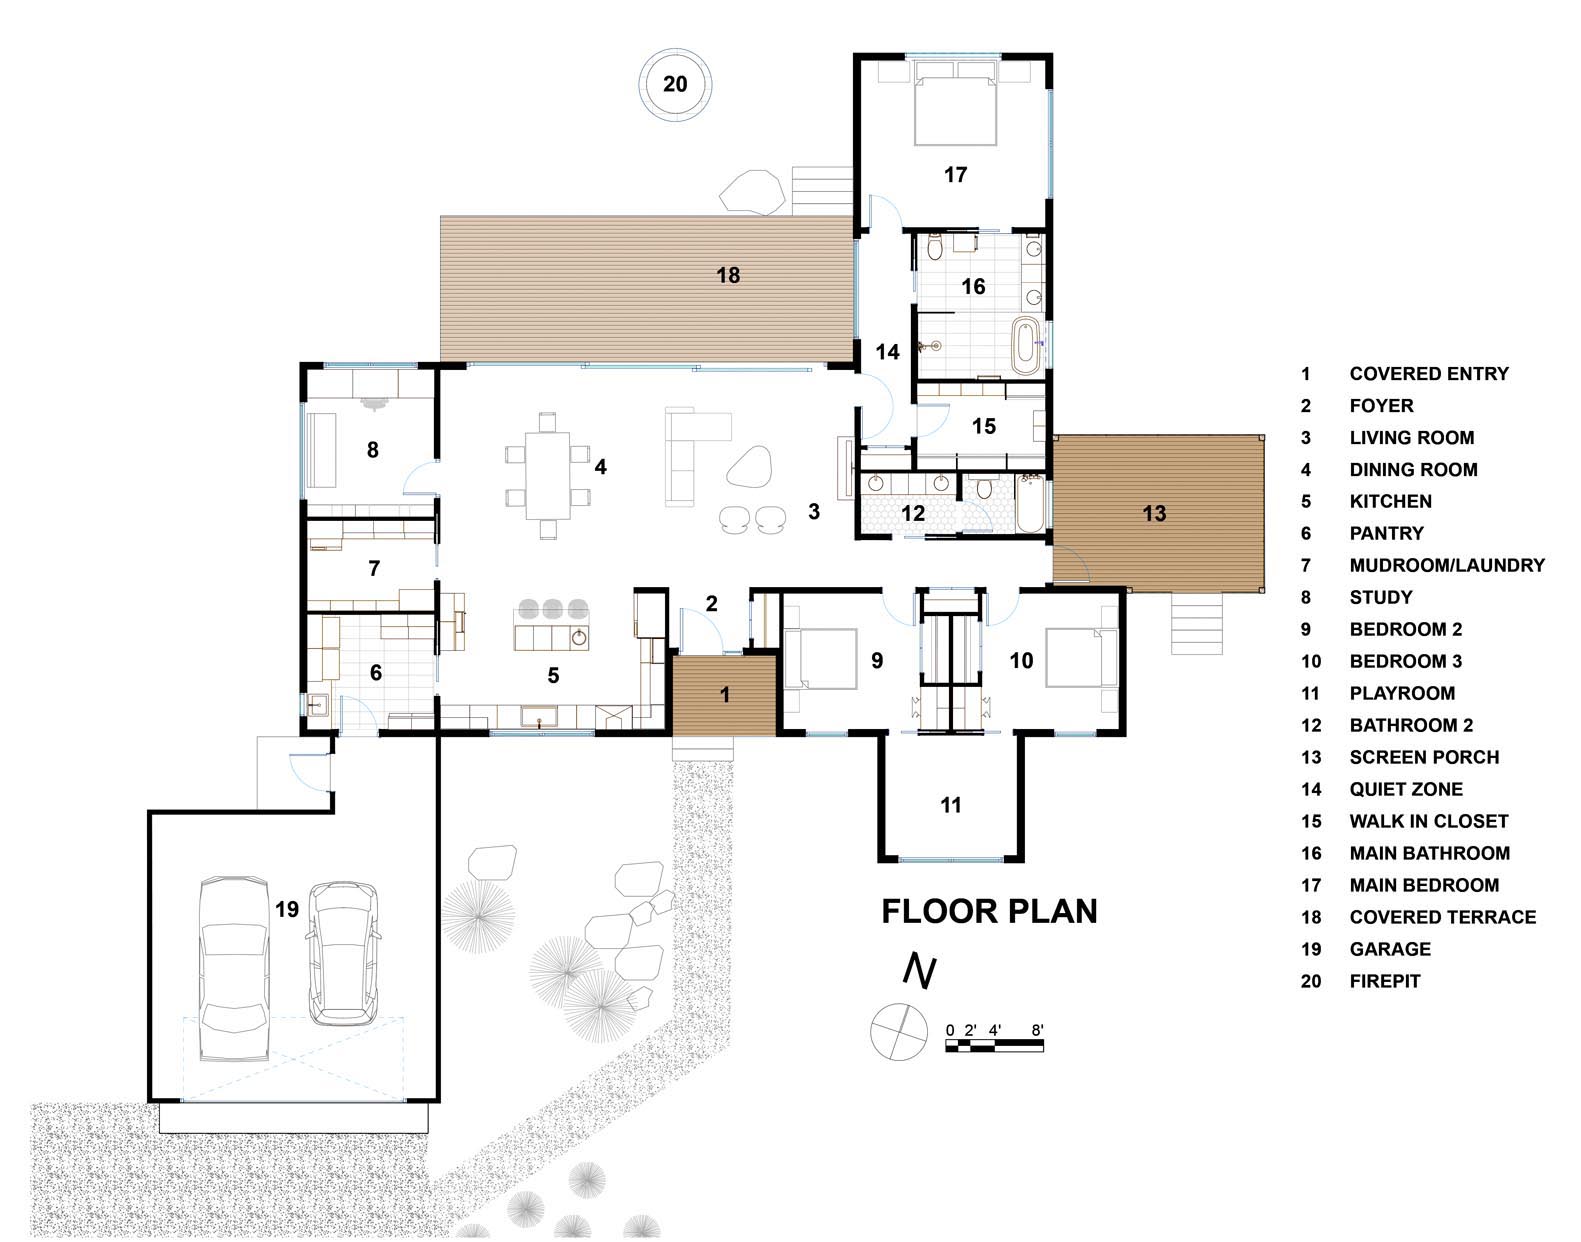 The floor plan of a modern home with a covered deck, and an open plan interior.